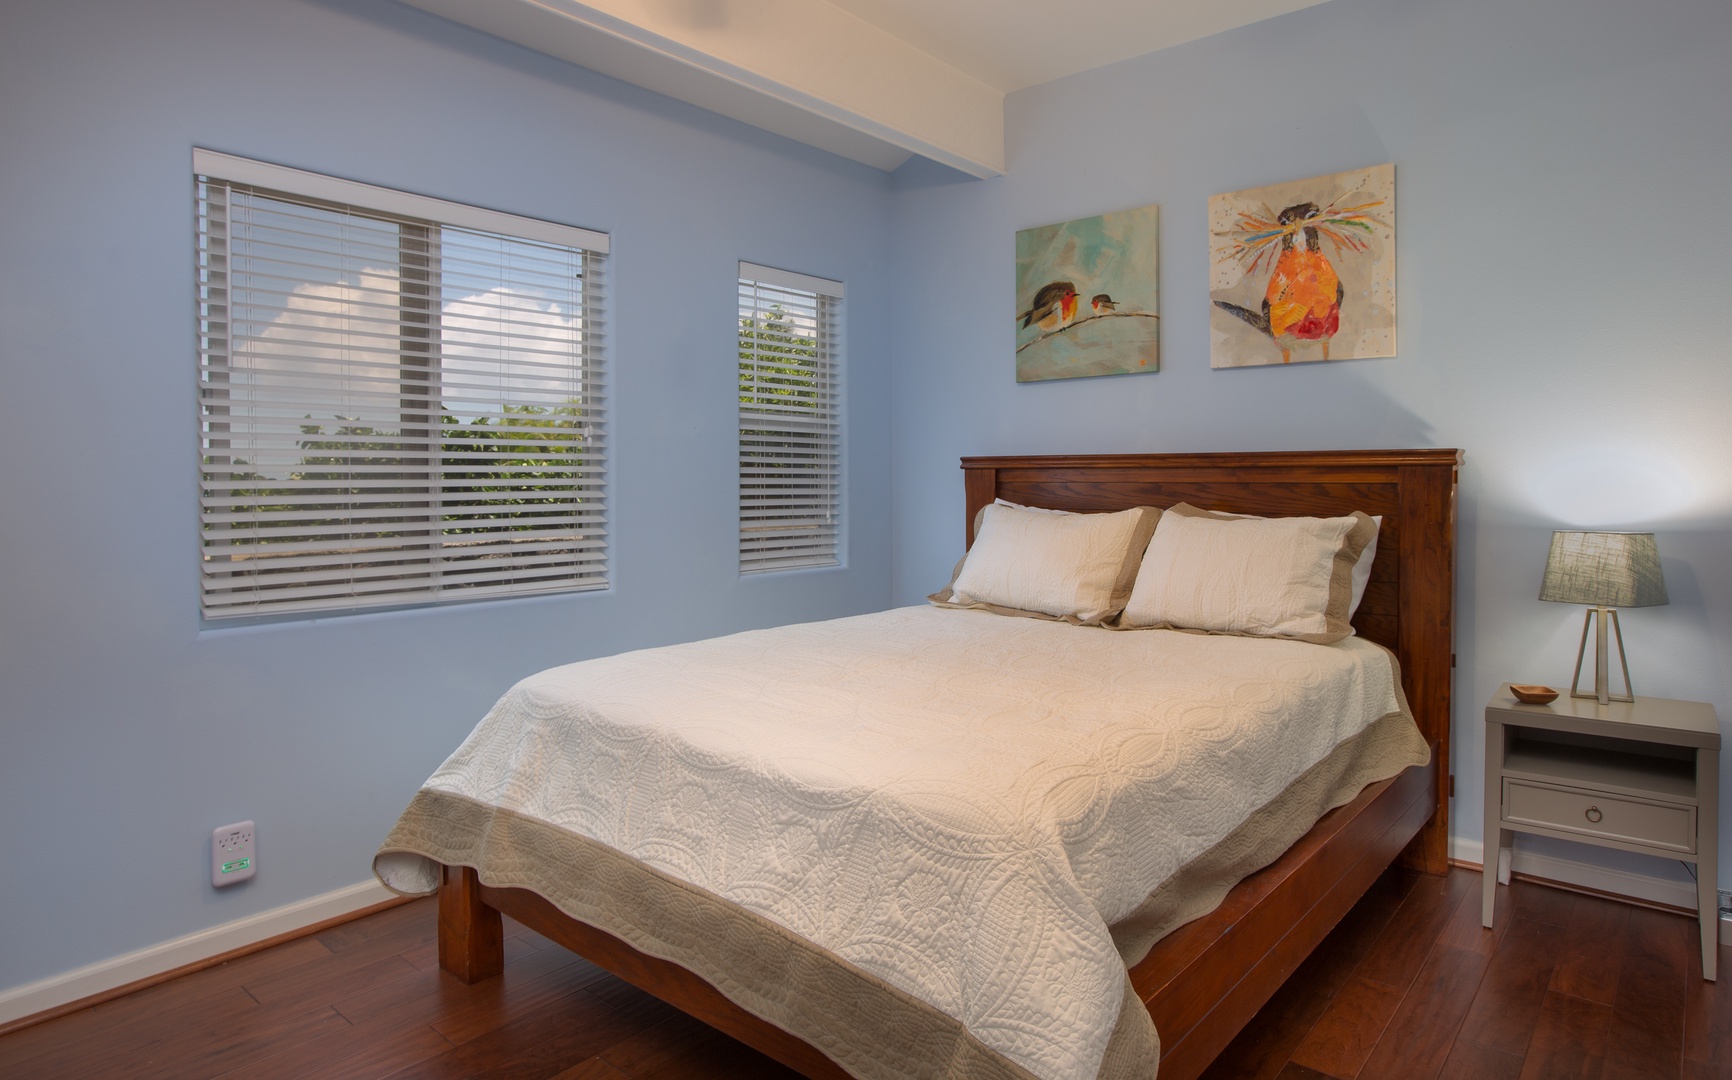 Kailua Kona Vacation Rentals, 7 C's Kona (Big Island) - Third bedroom, equipped with queen bed, spacious closet, and 32" HD smart TV.